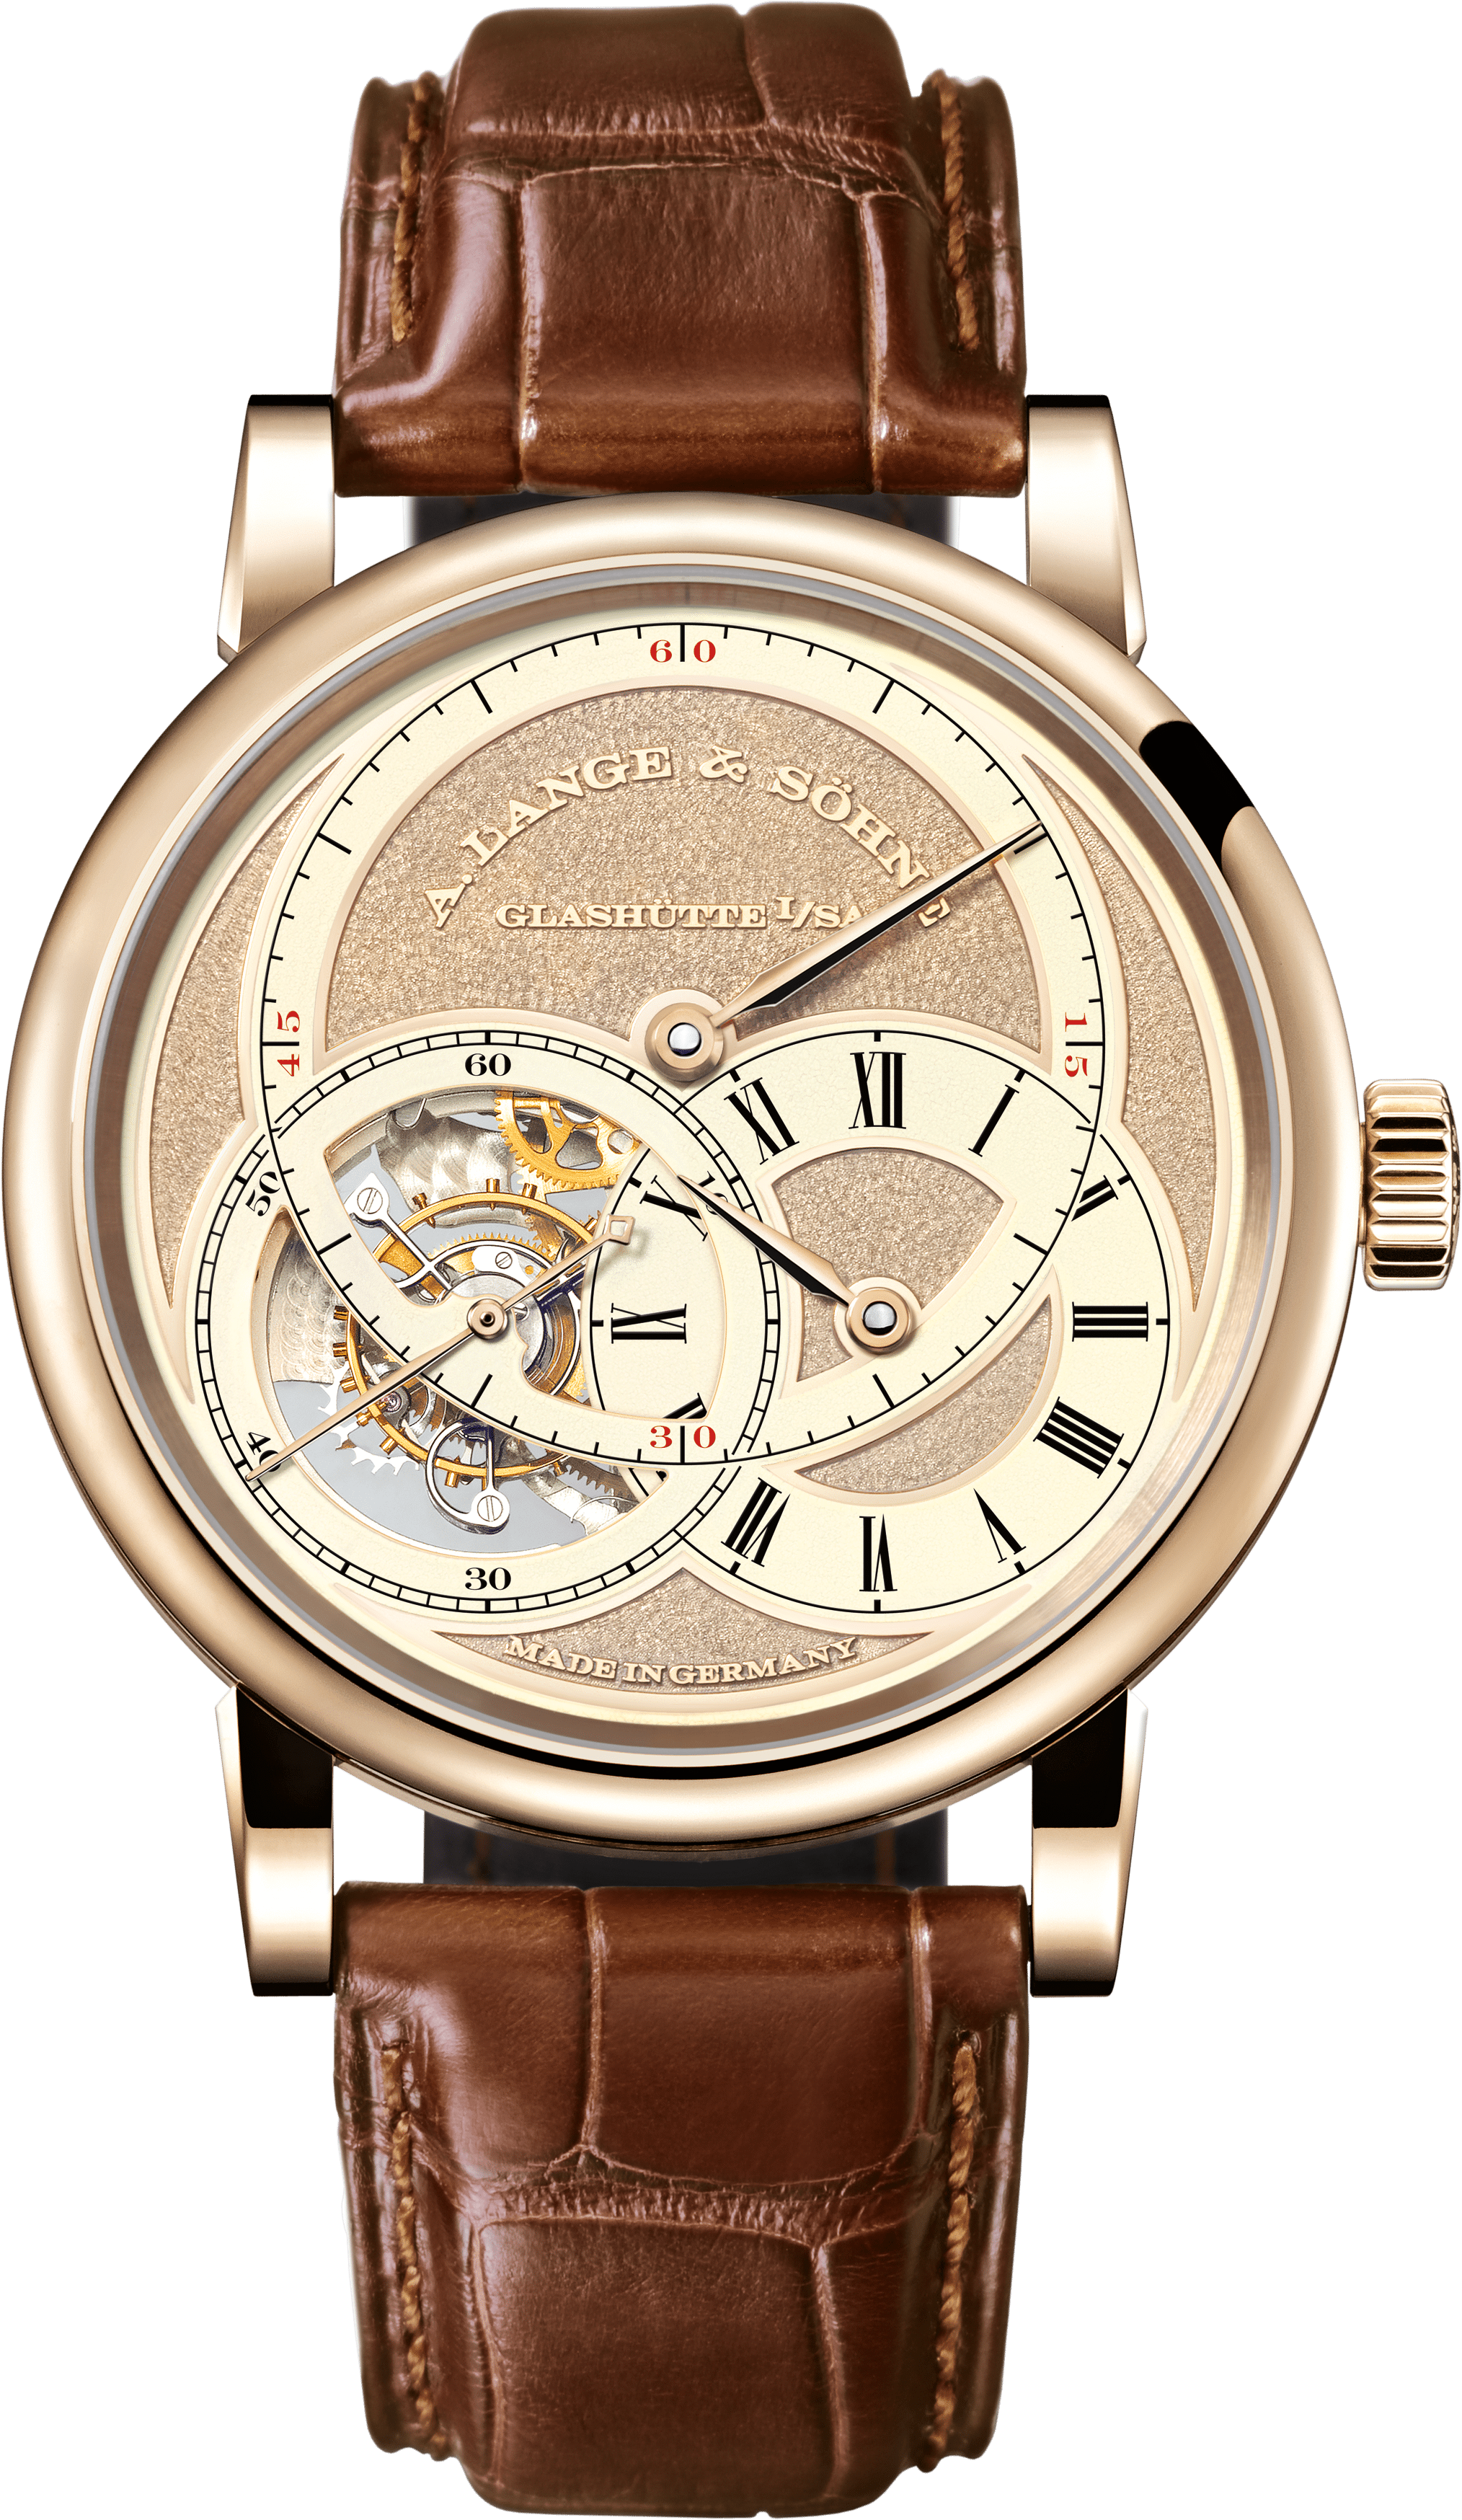 Jaeger Lecoultre Imitation Watches